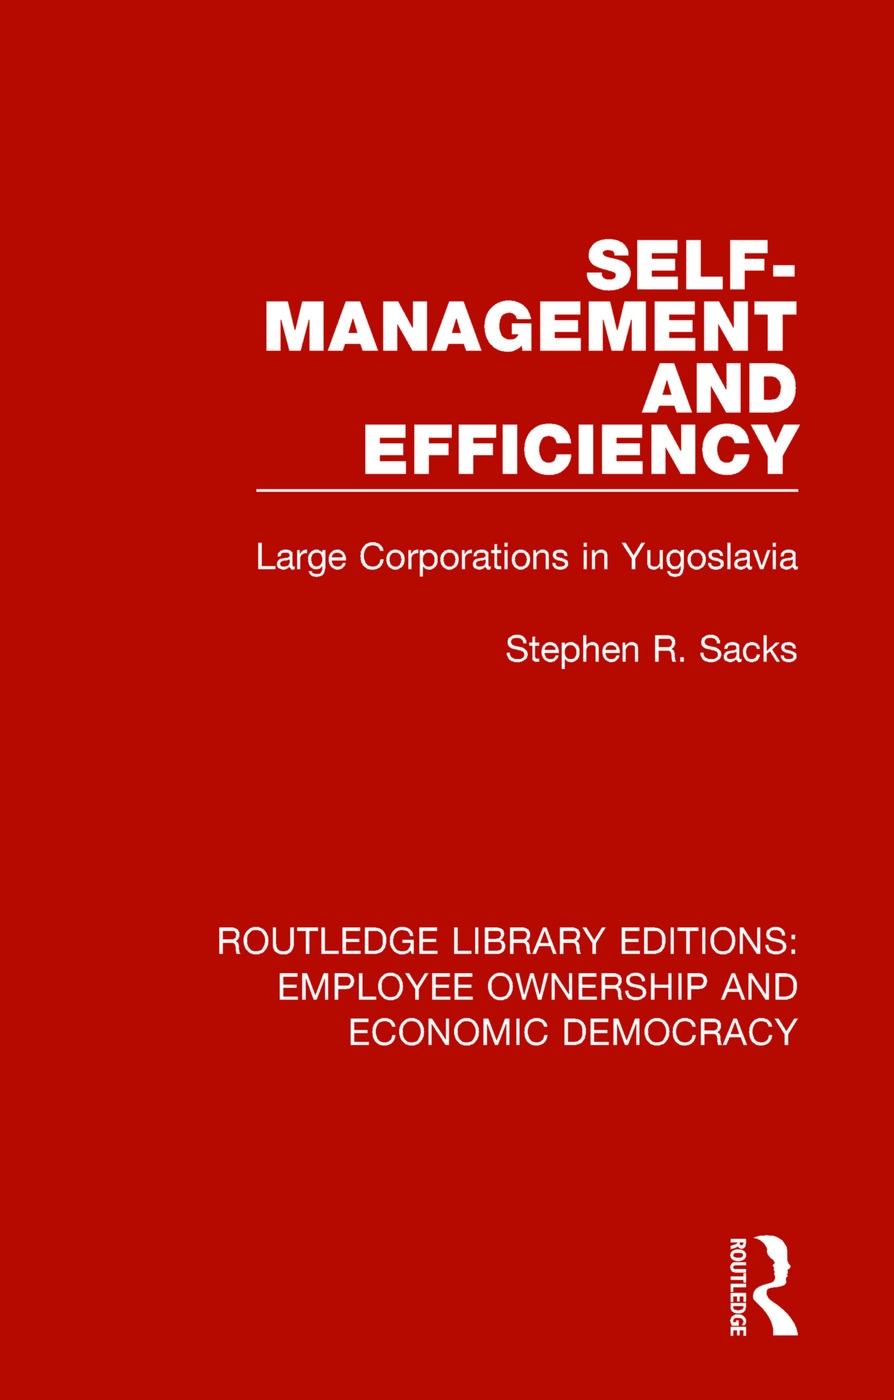 Self-Management and Efficiency: Large Corporations in Yugoslavia